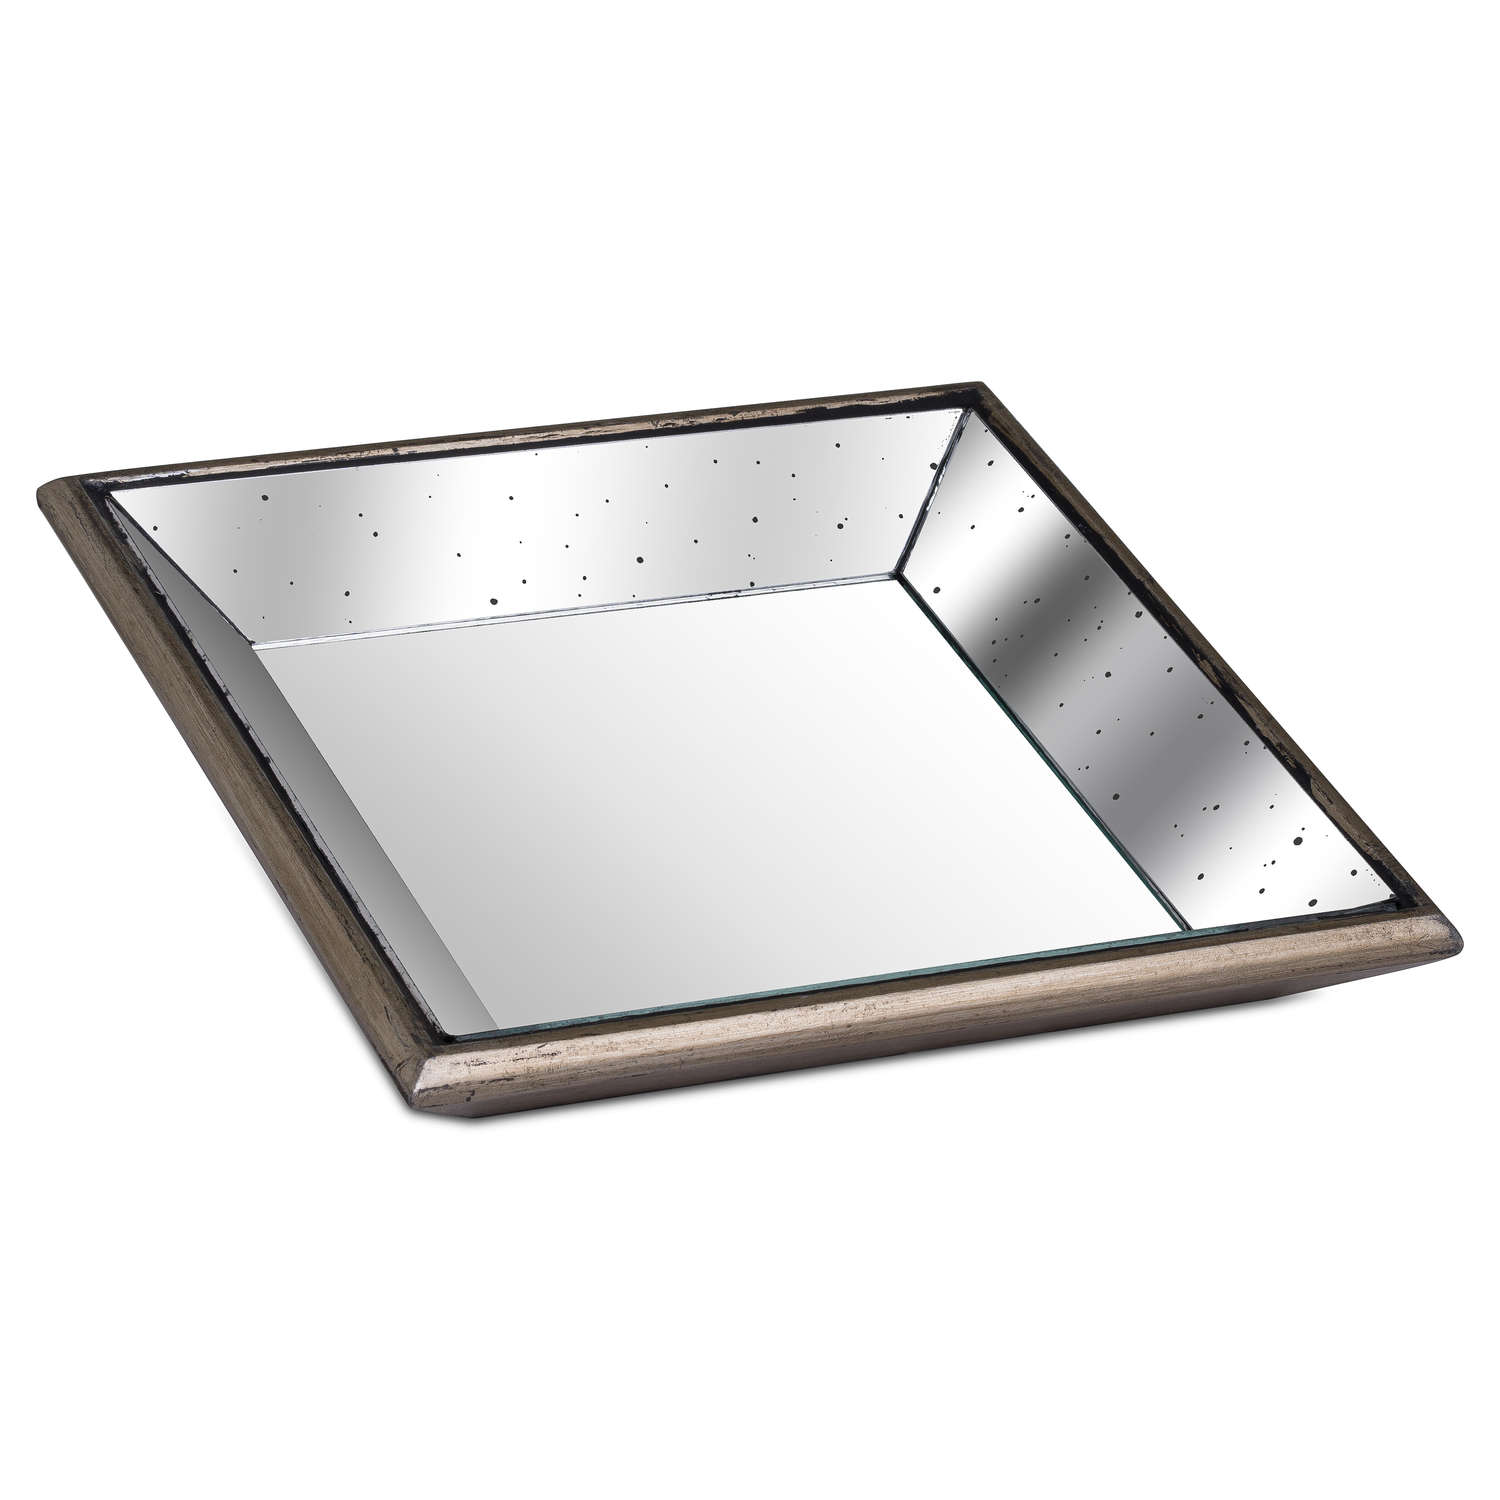 Astor Distressed Mirrored Square Tray W/Wooden Detailing Sml - Image 1